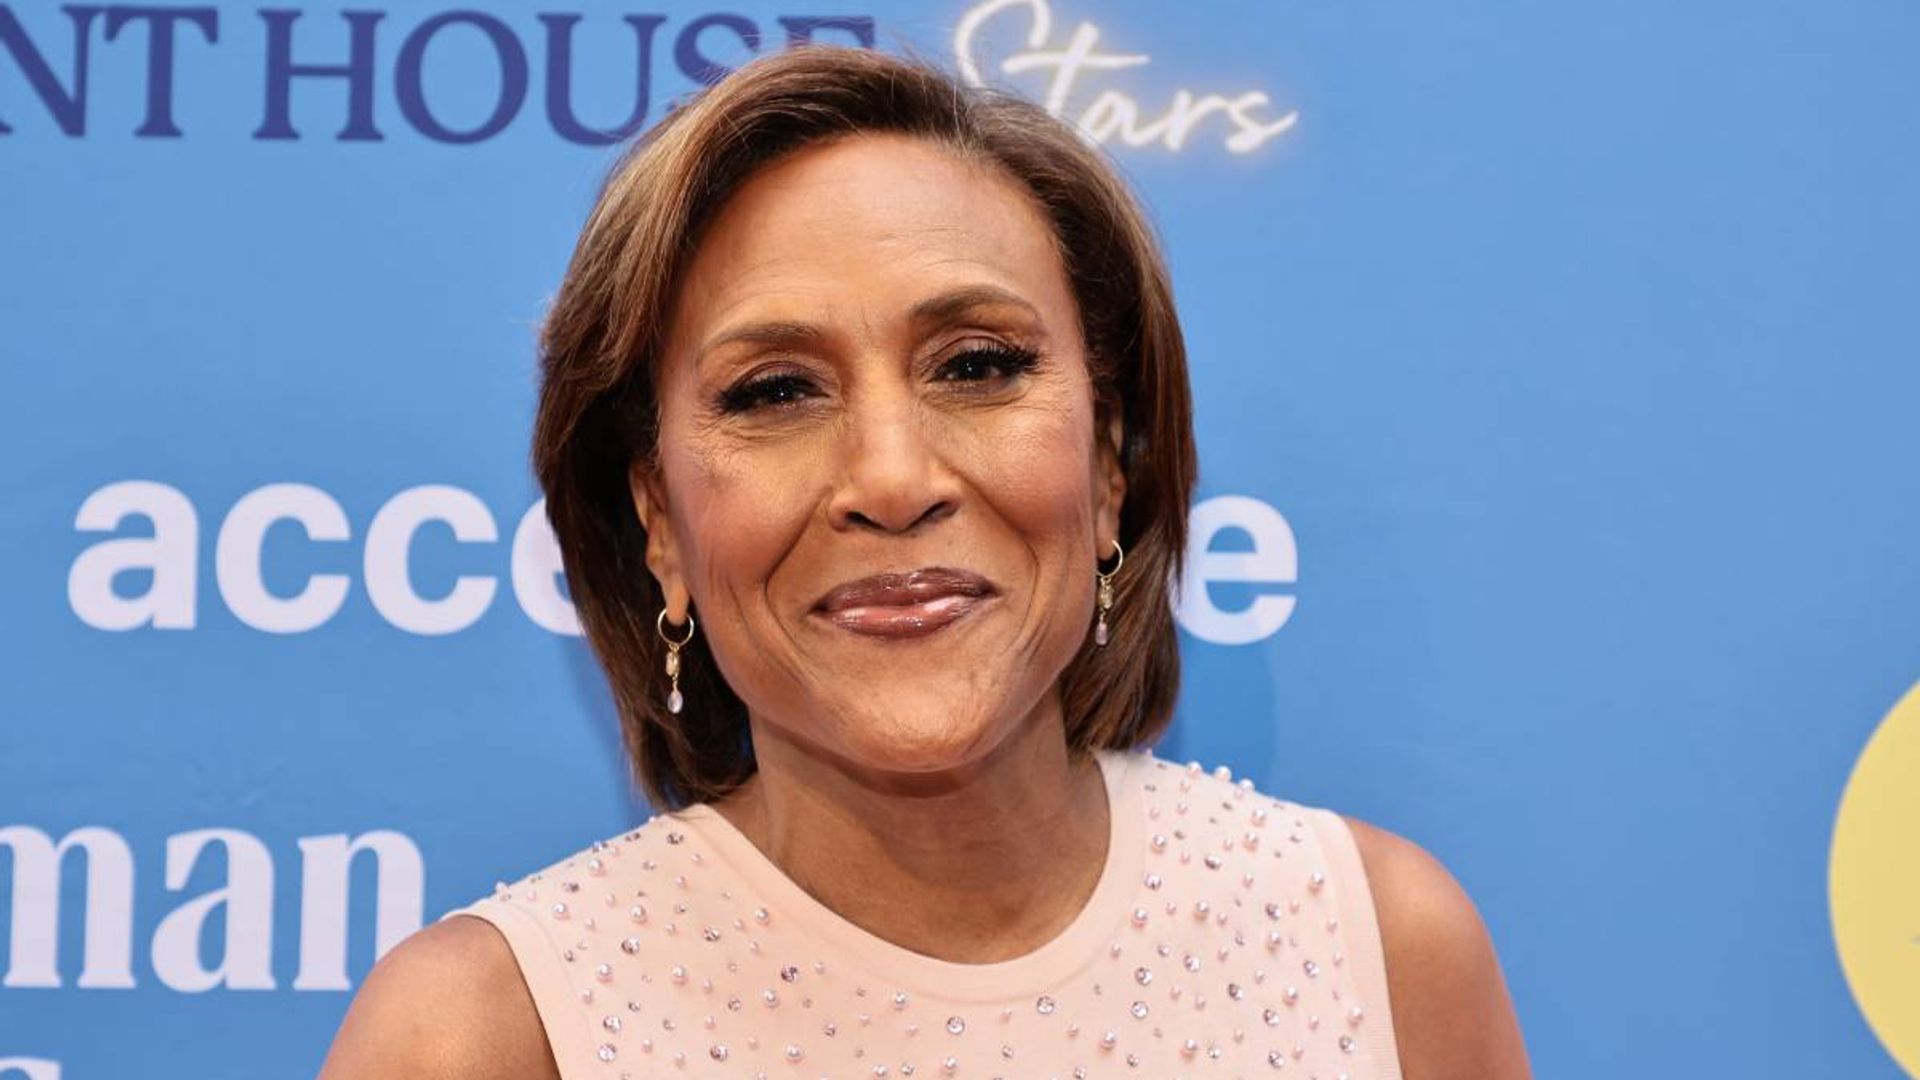 Robin Roberts welcomed back by fans as she reveals laryngitis battle as reason for GMA absence